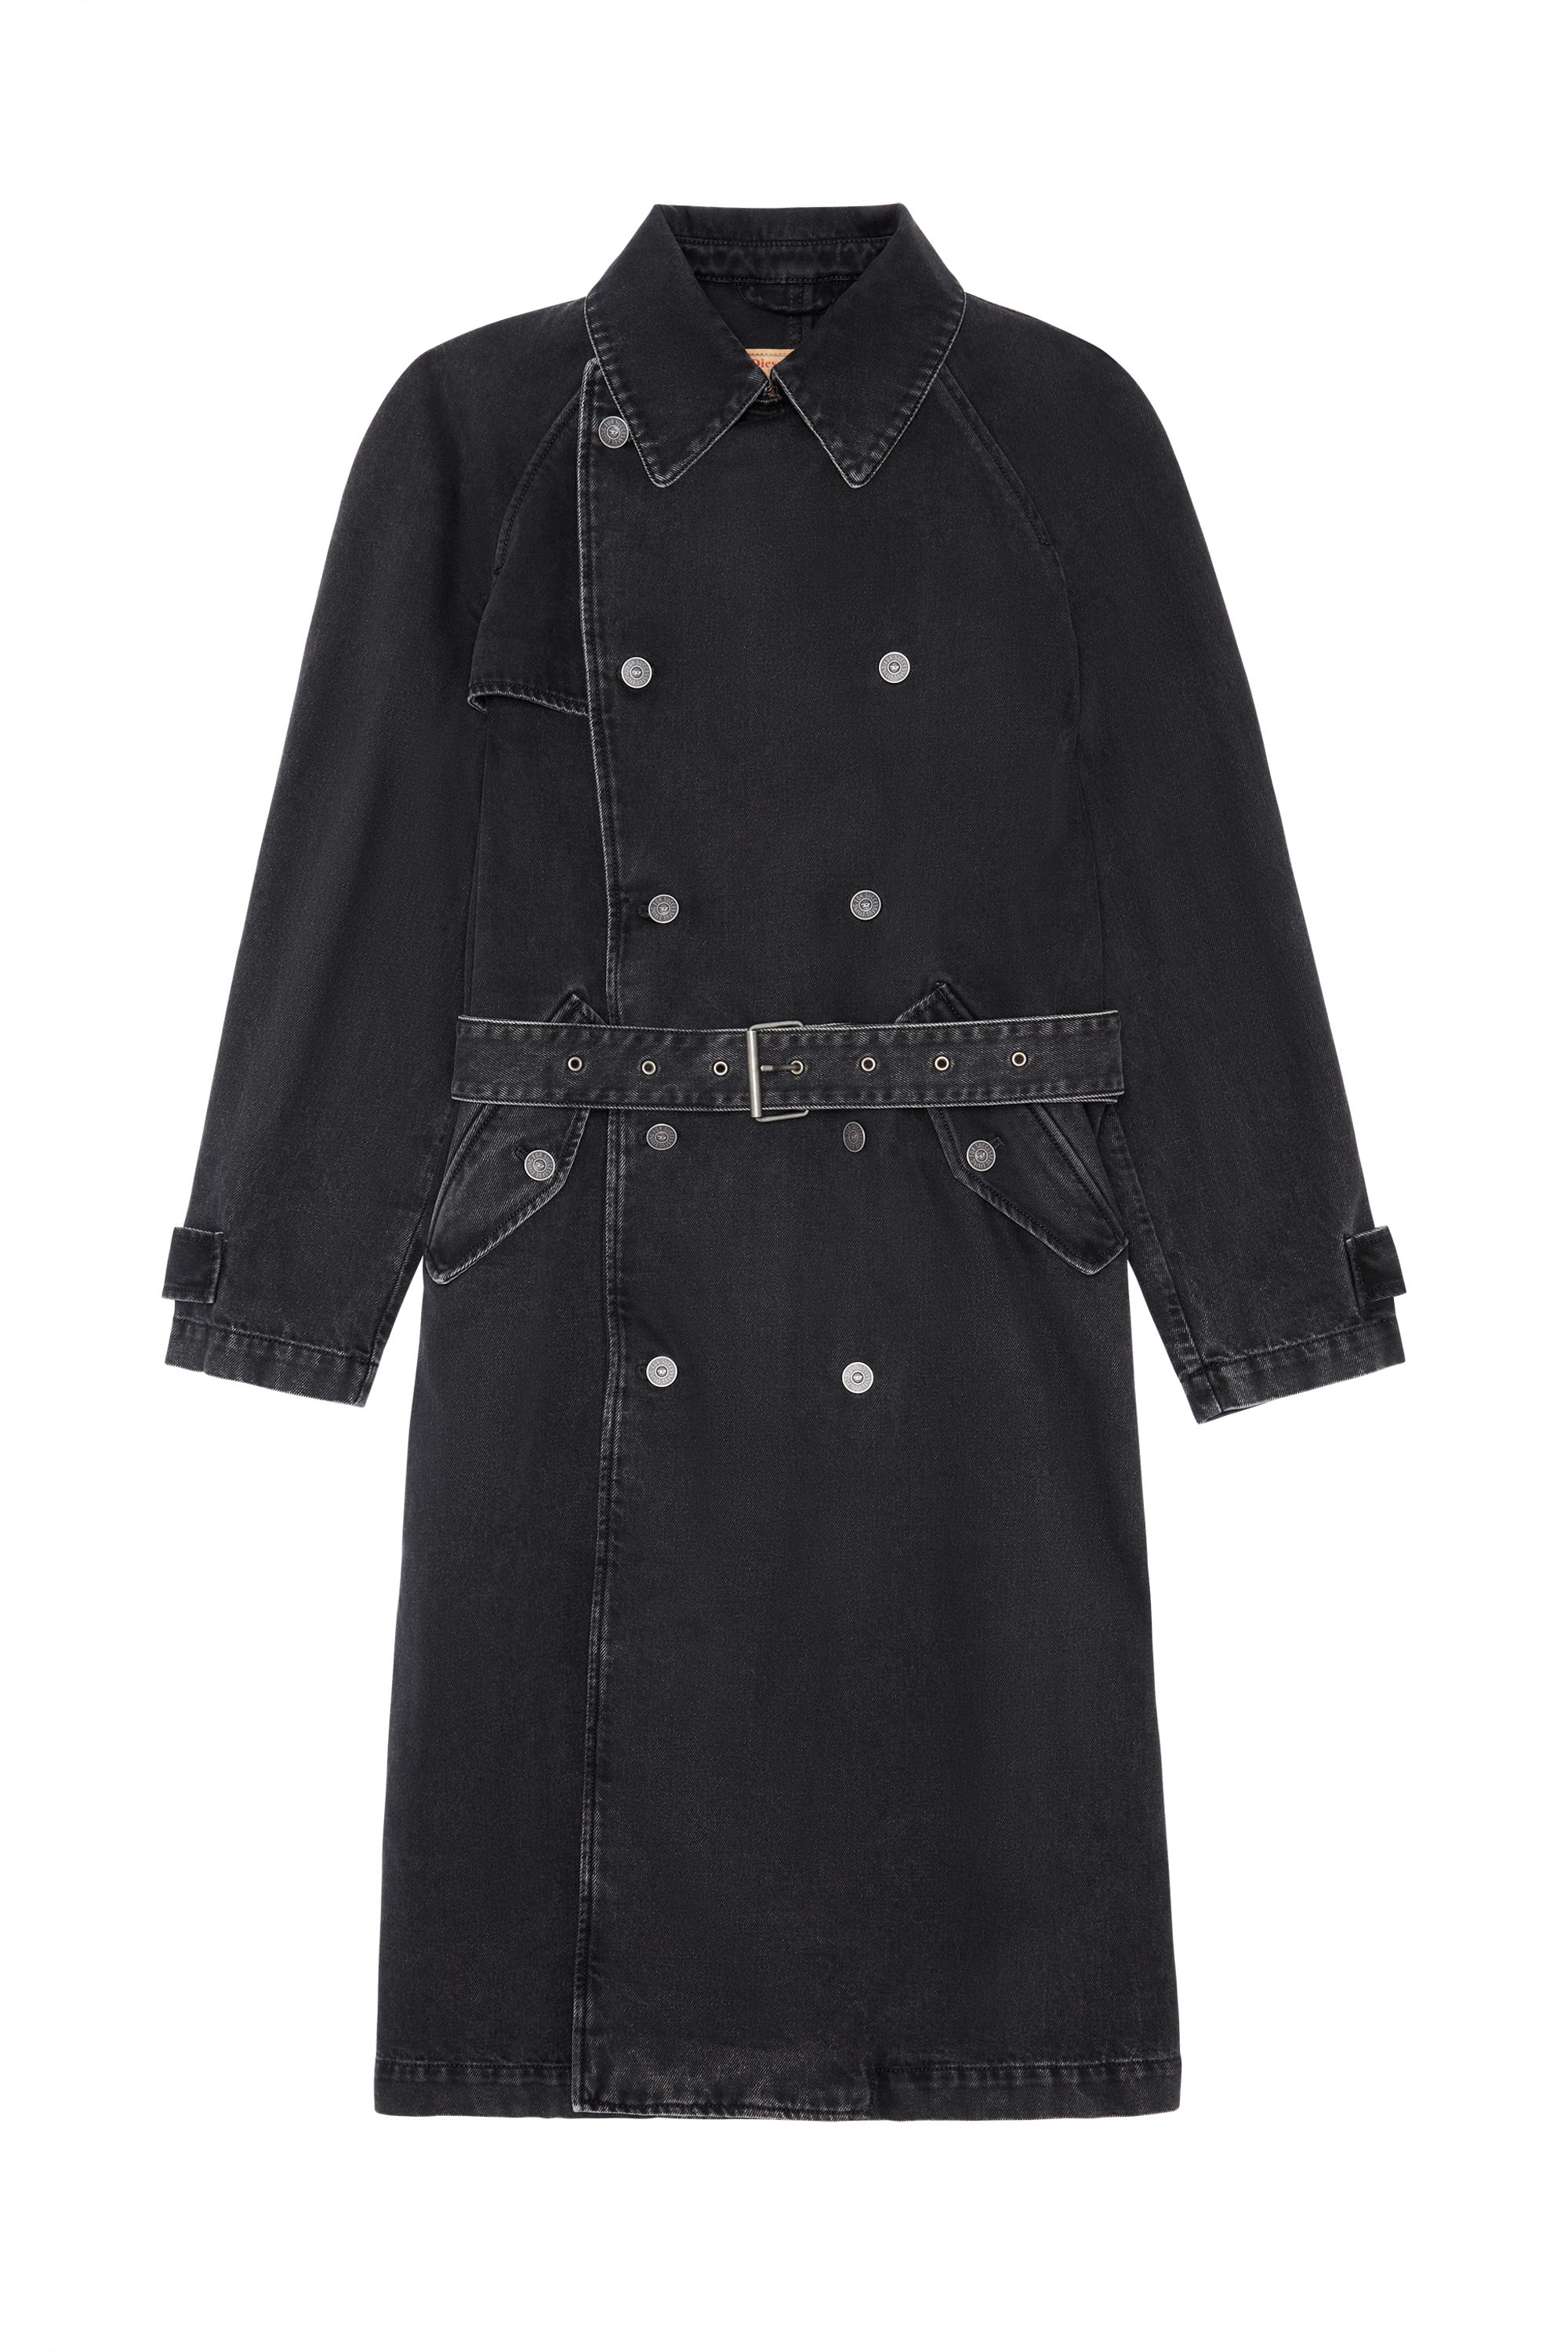 D-DELIRIOUS DOUBLE BREASTED TRENCH COAT, Black/Dark grey - Denim Jackets